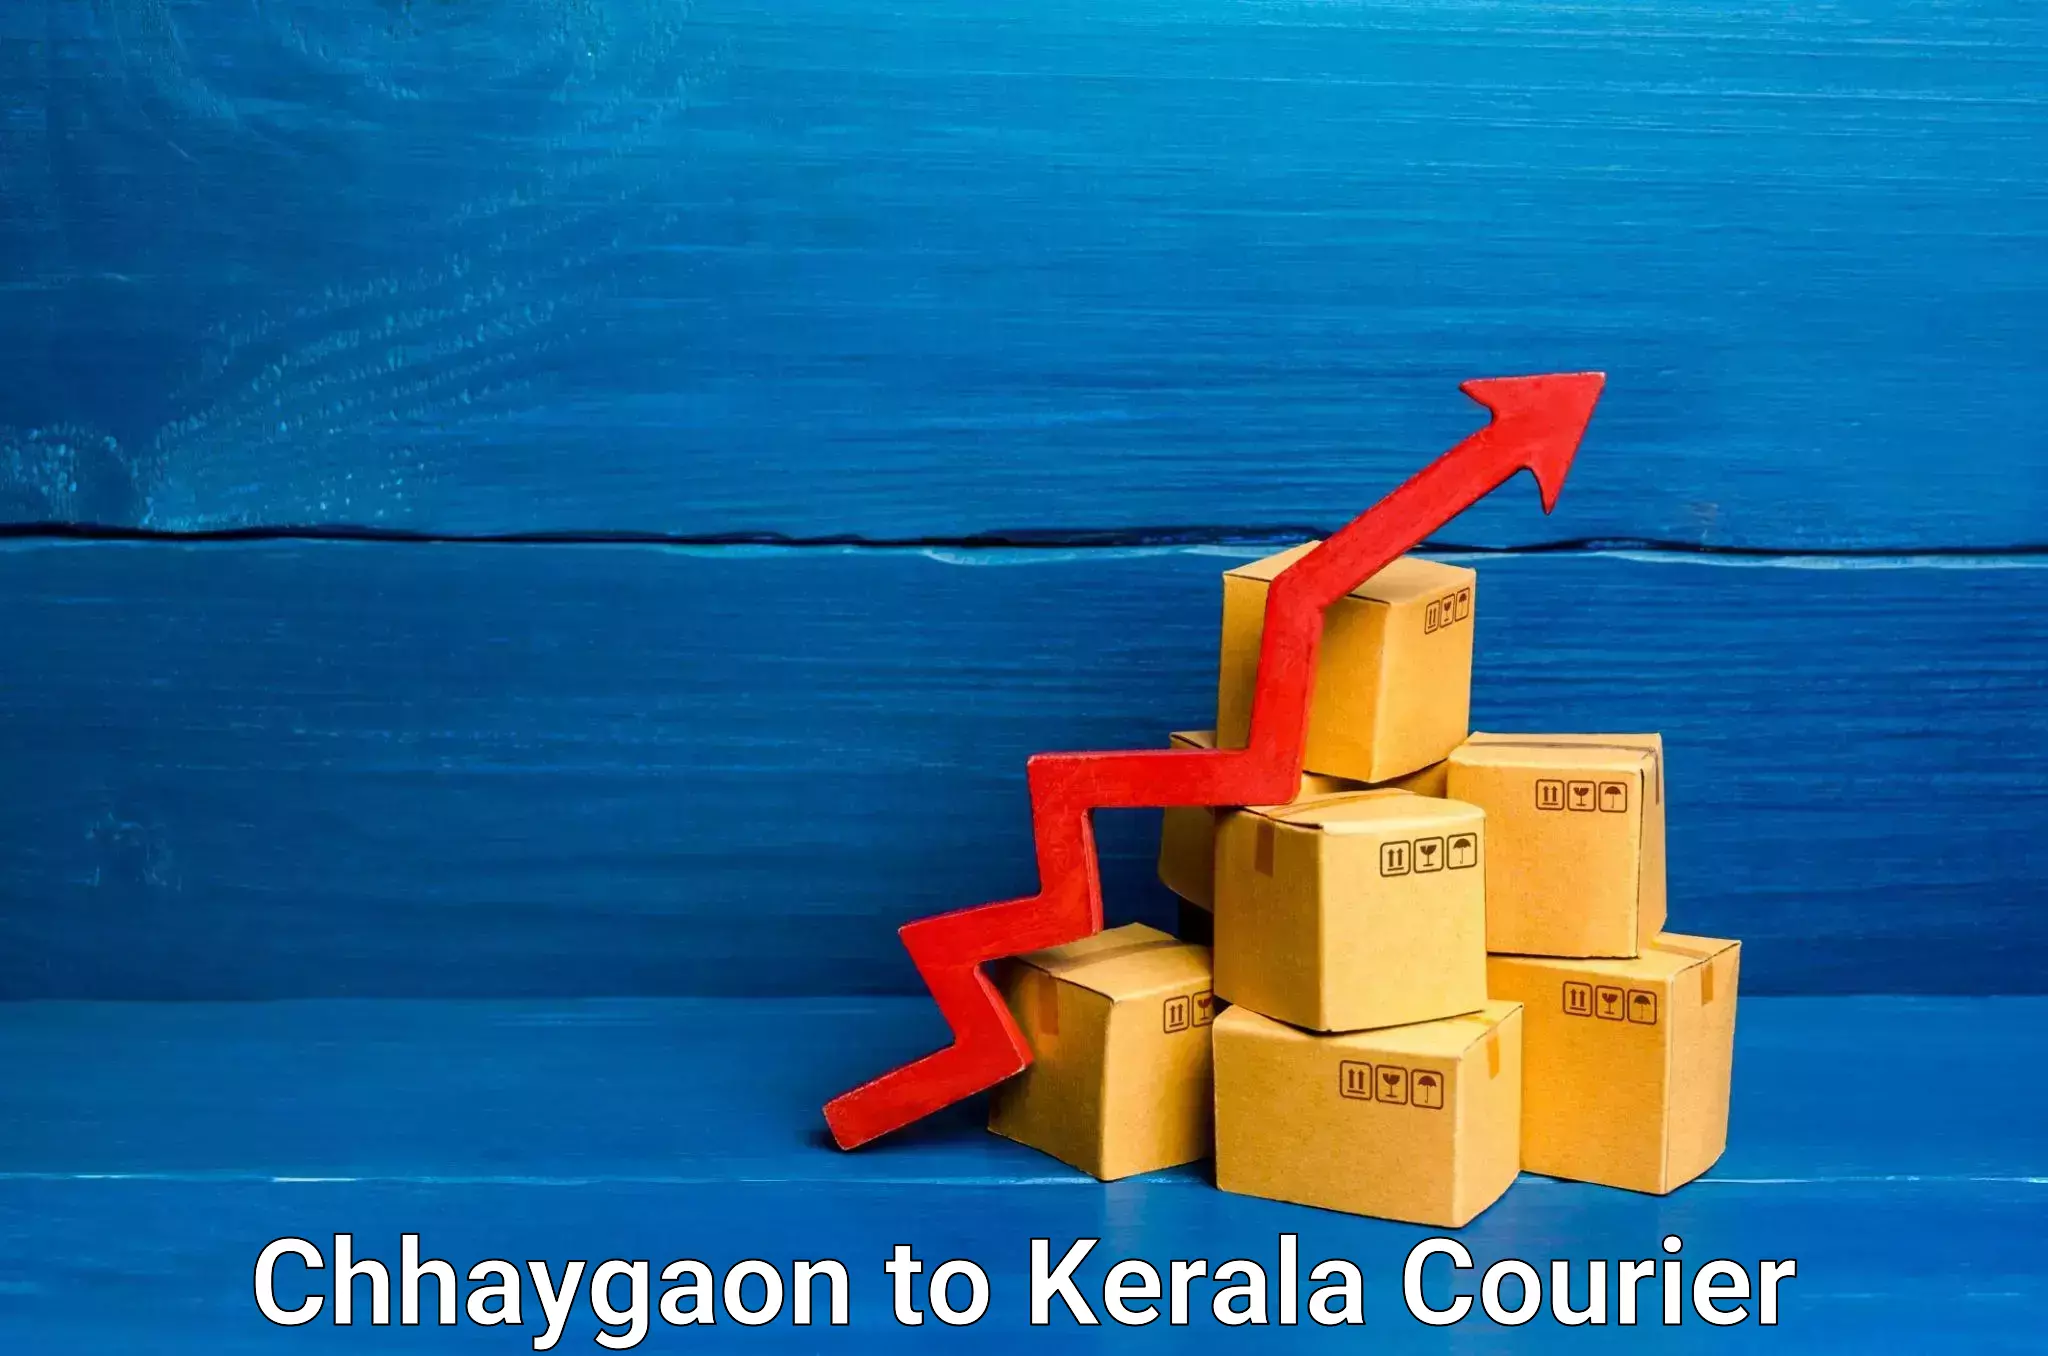 Rapid shipping services Chhaygaon to Cochin Port Kochi